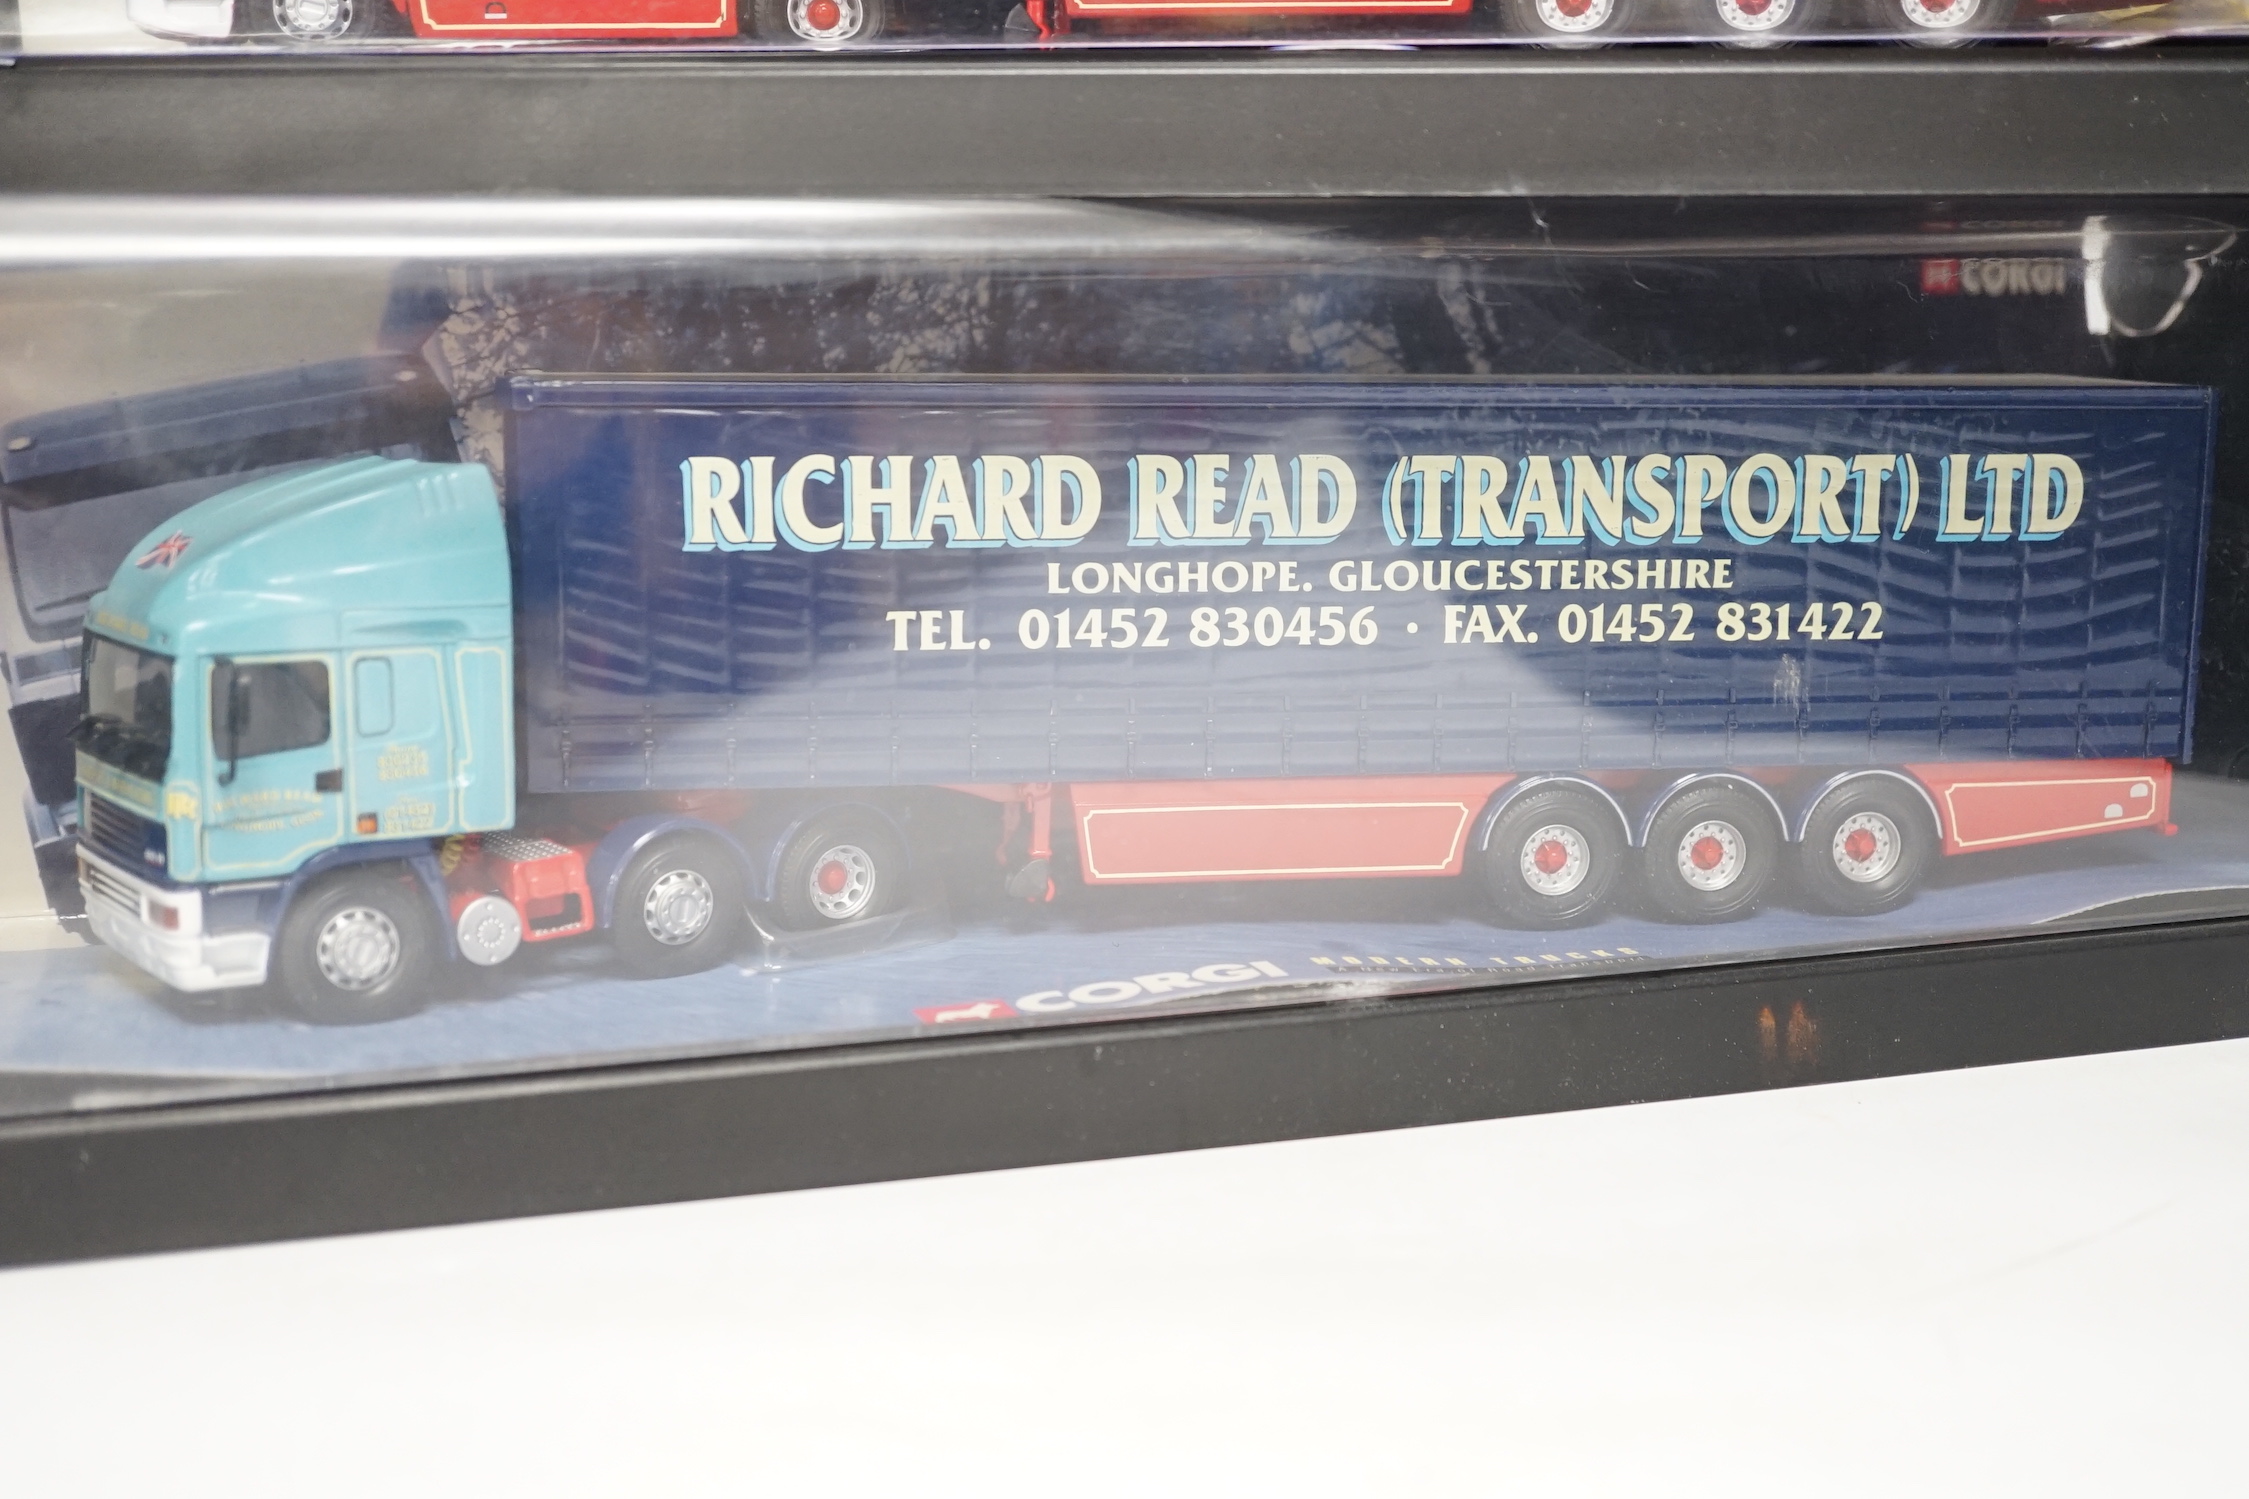 Four boxed Corgi and Universal Hobbies 1:50 scale articulated trucks; a Leyland DAF lorry (75401), an ERF curtainside lorry (75203), a Lion Toys DAF with box trailer, and a Universal Hobbies Scania Topline